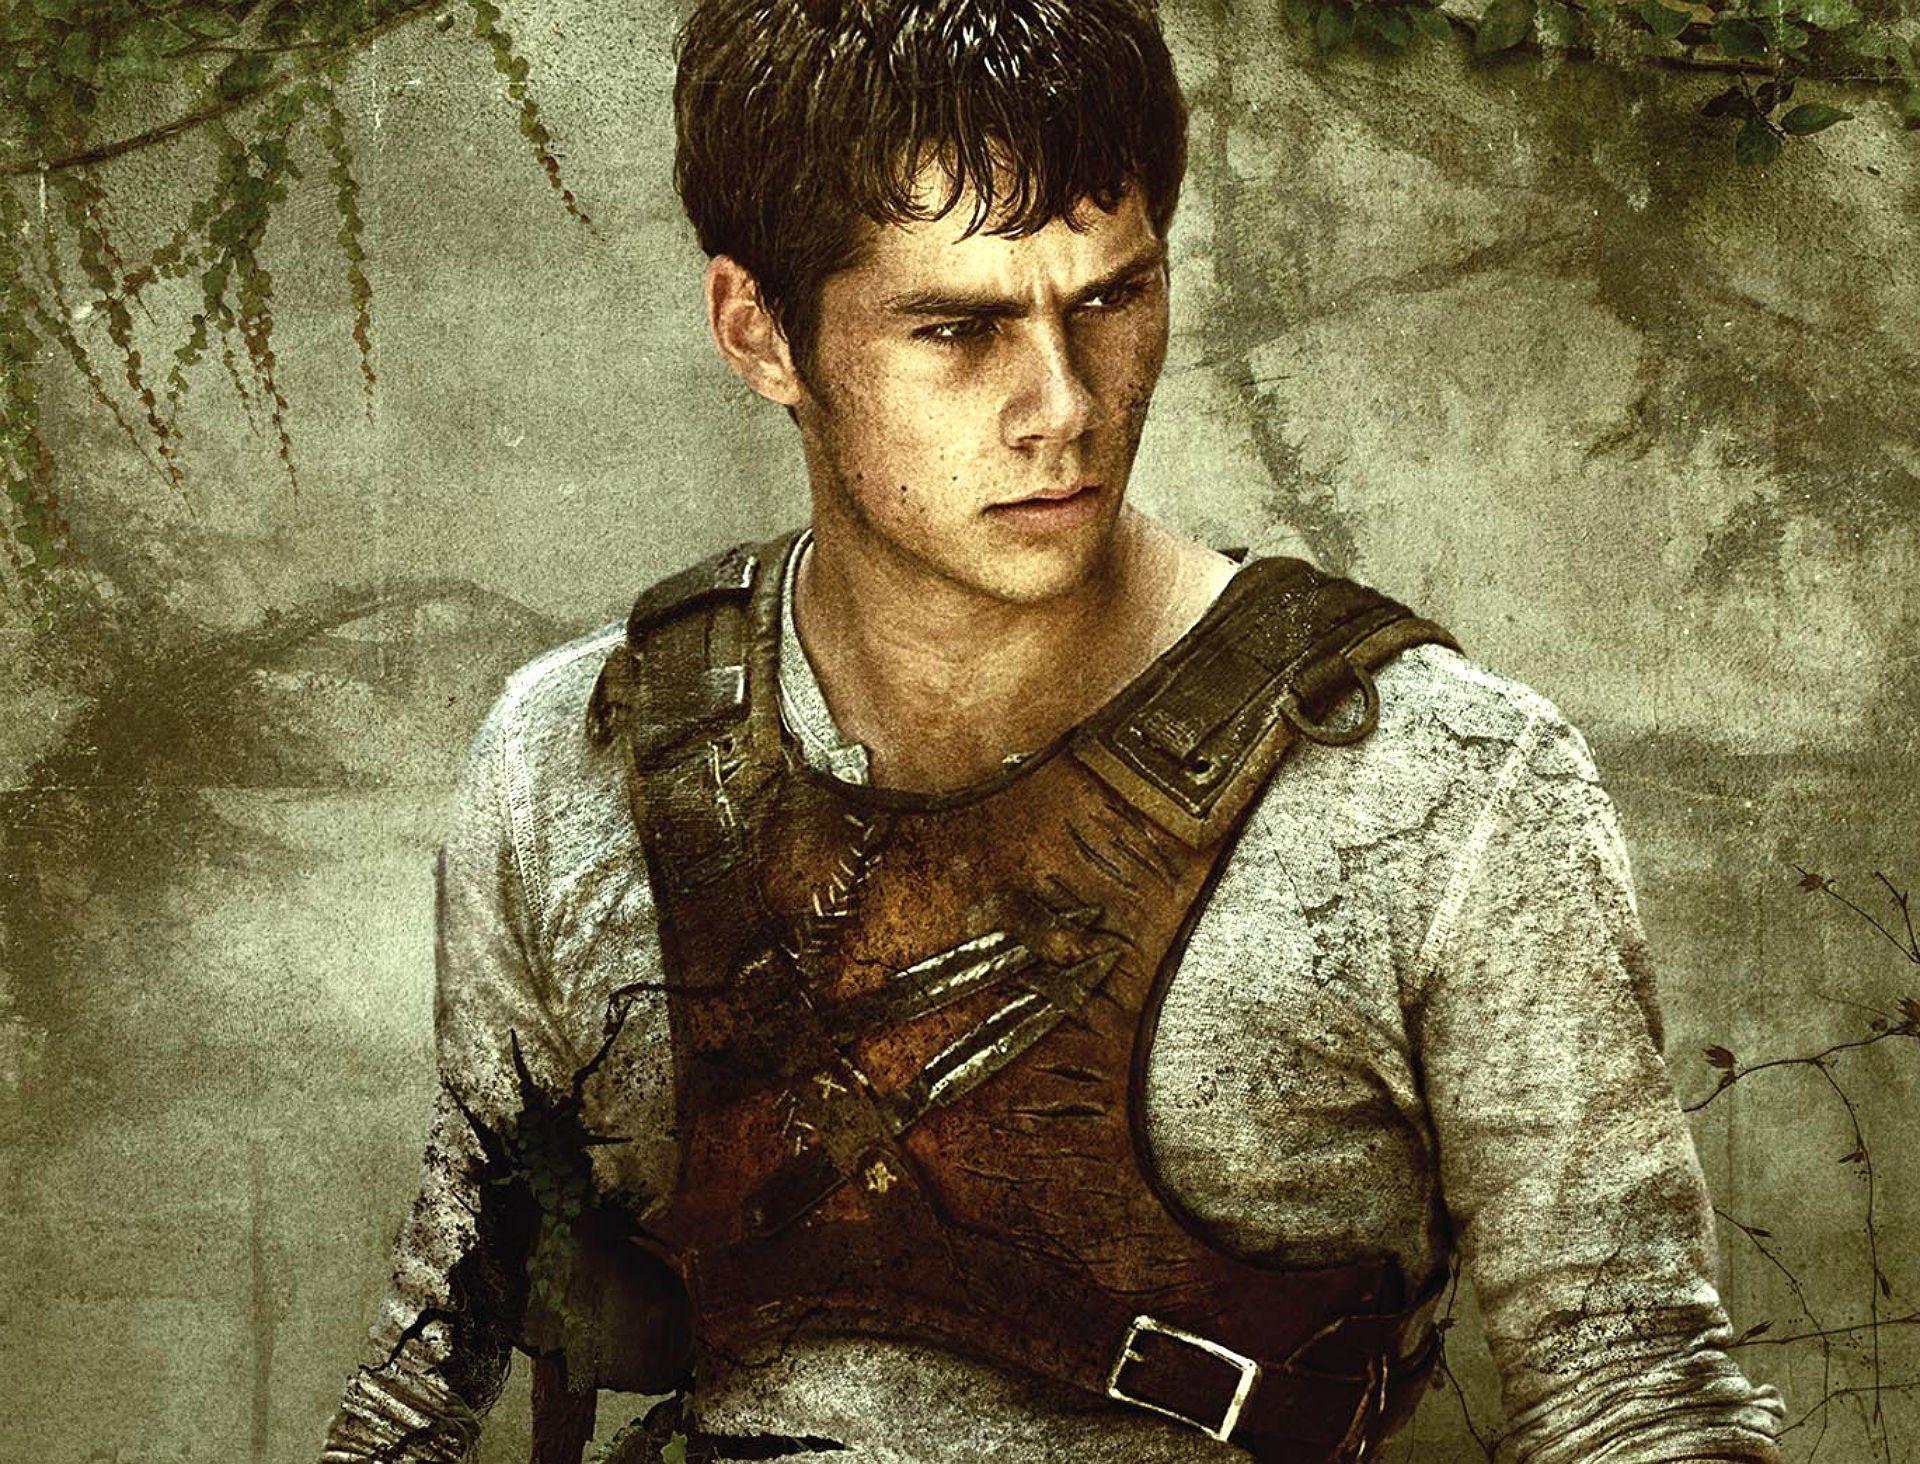 The Maze Runner Wallpapers Picture For iPhone Blackberry iPad.